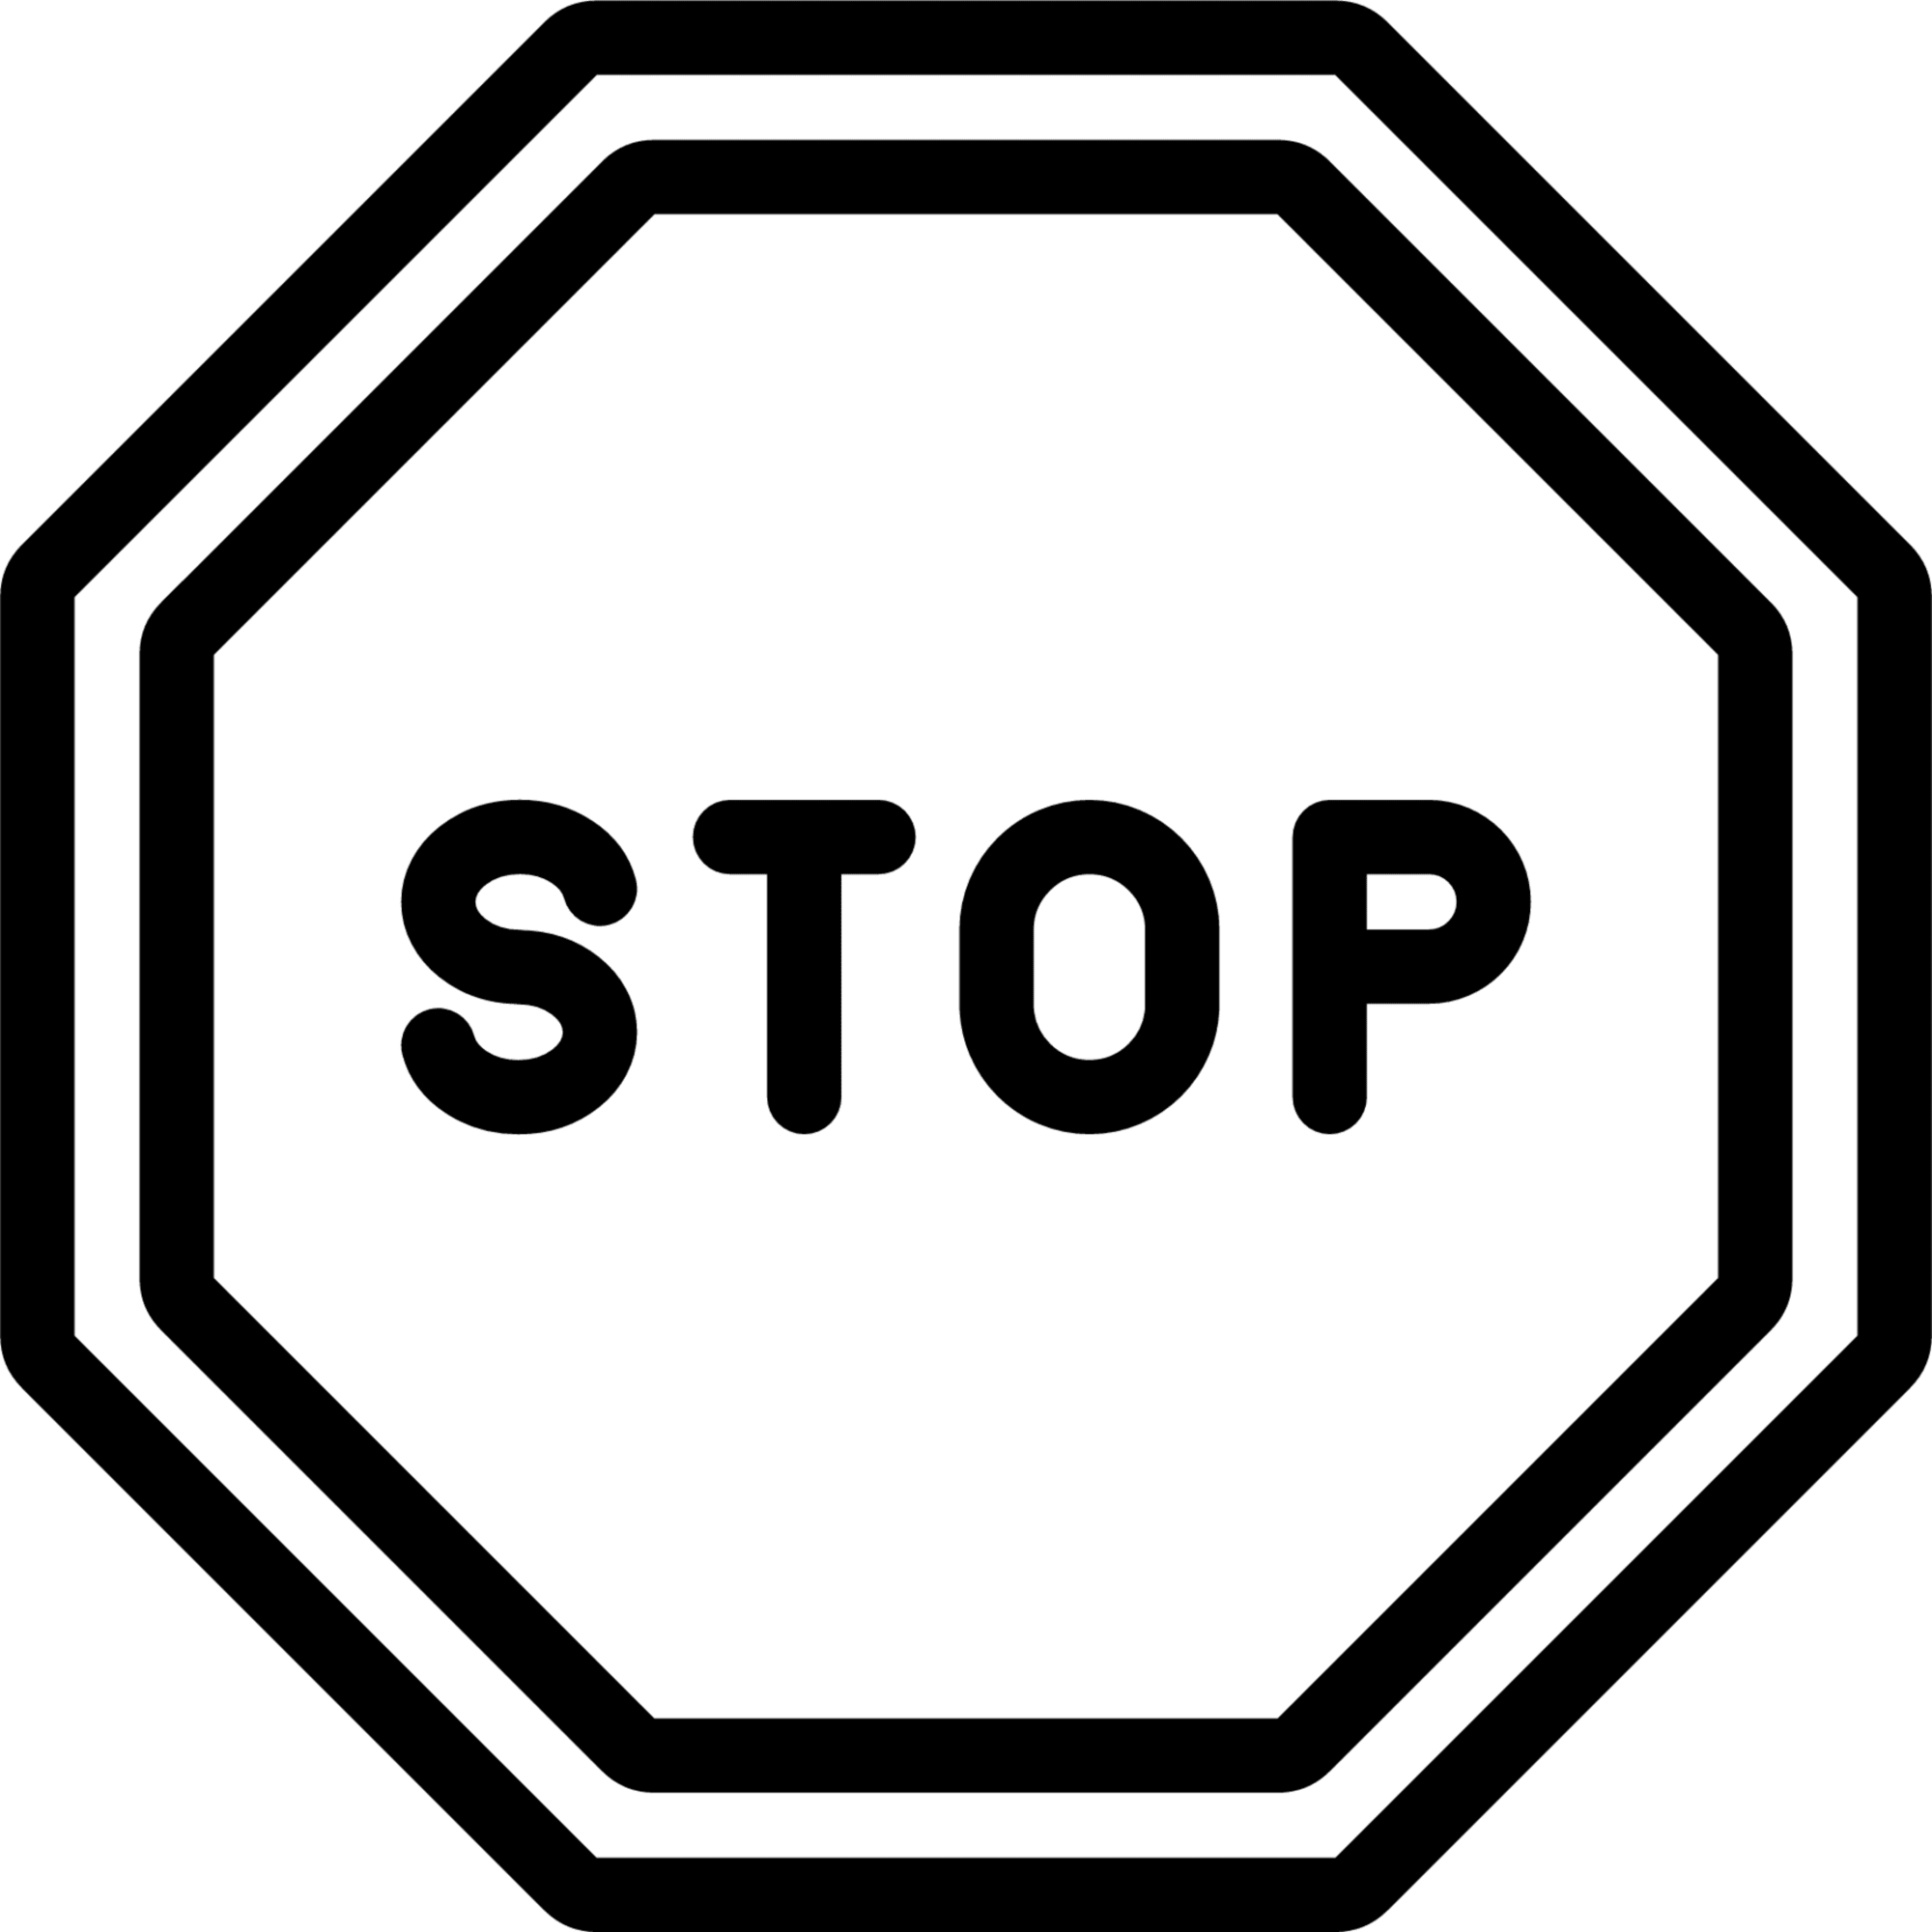 Stop signal sign emoji for clipart free